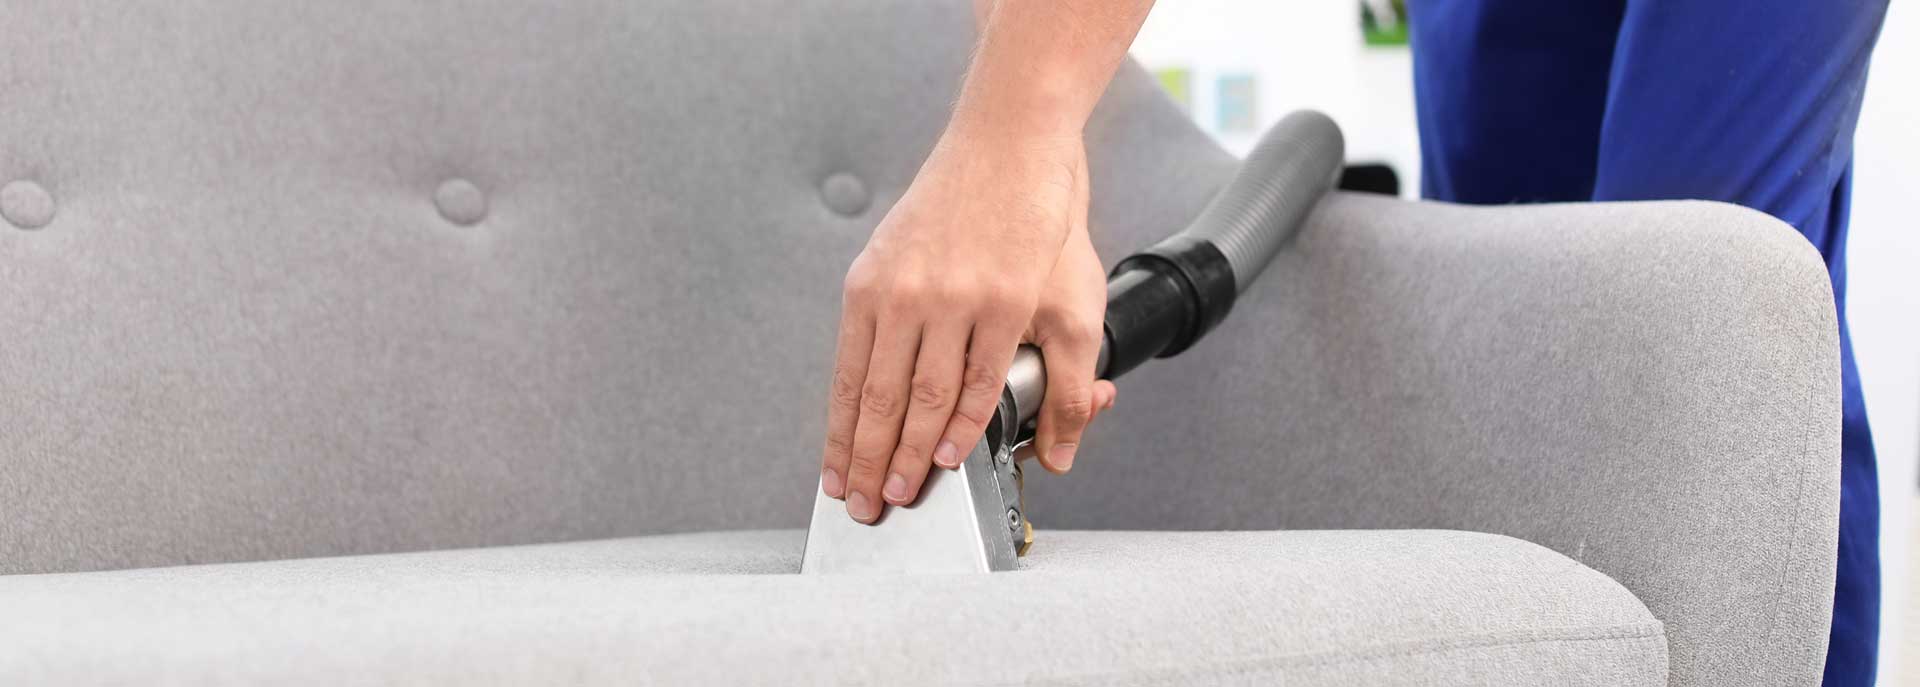 Greater Cleveland area upholstery cleaning services